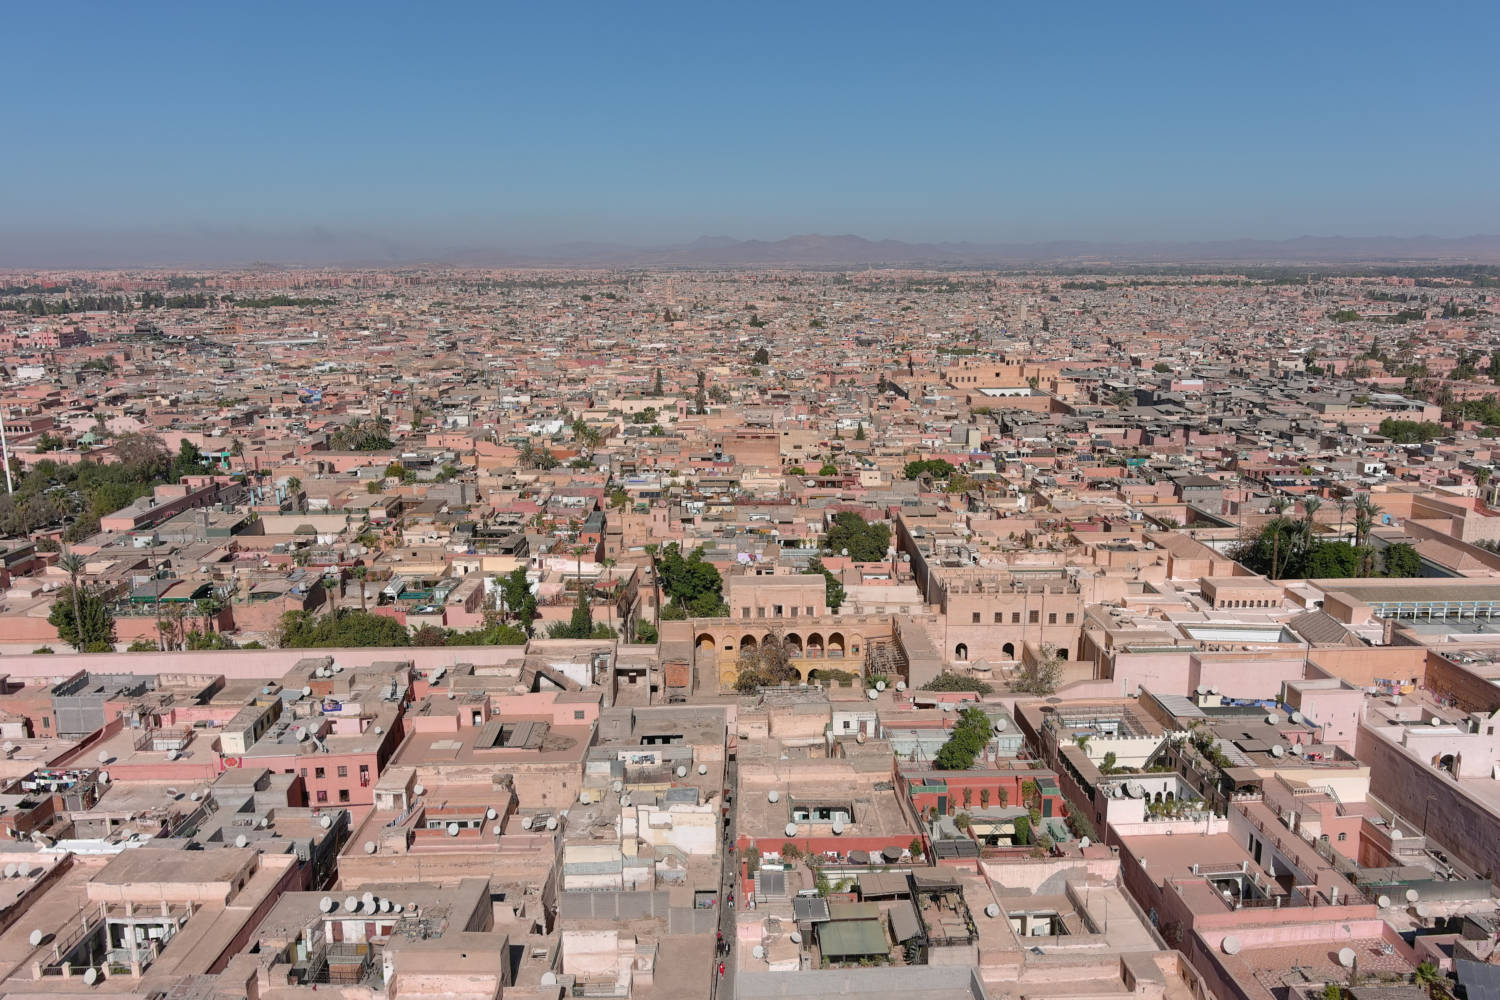 File Photo: An Aerial View Of Marrakech, Morocco